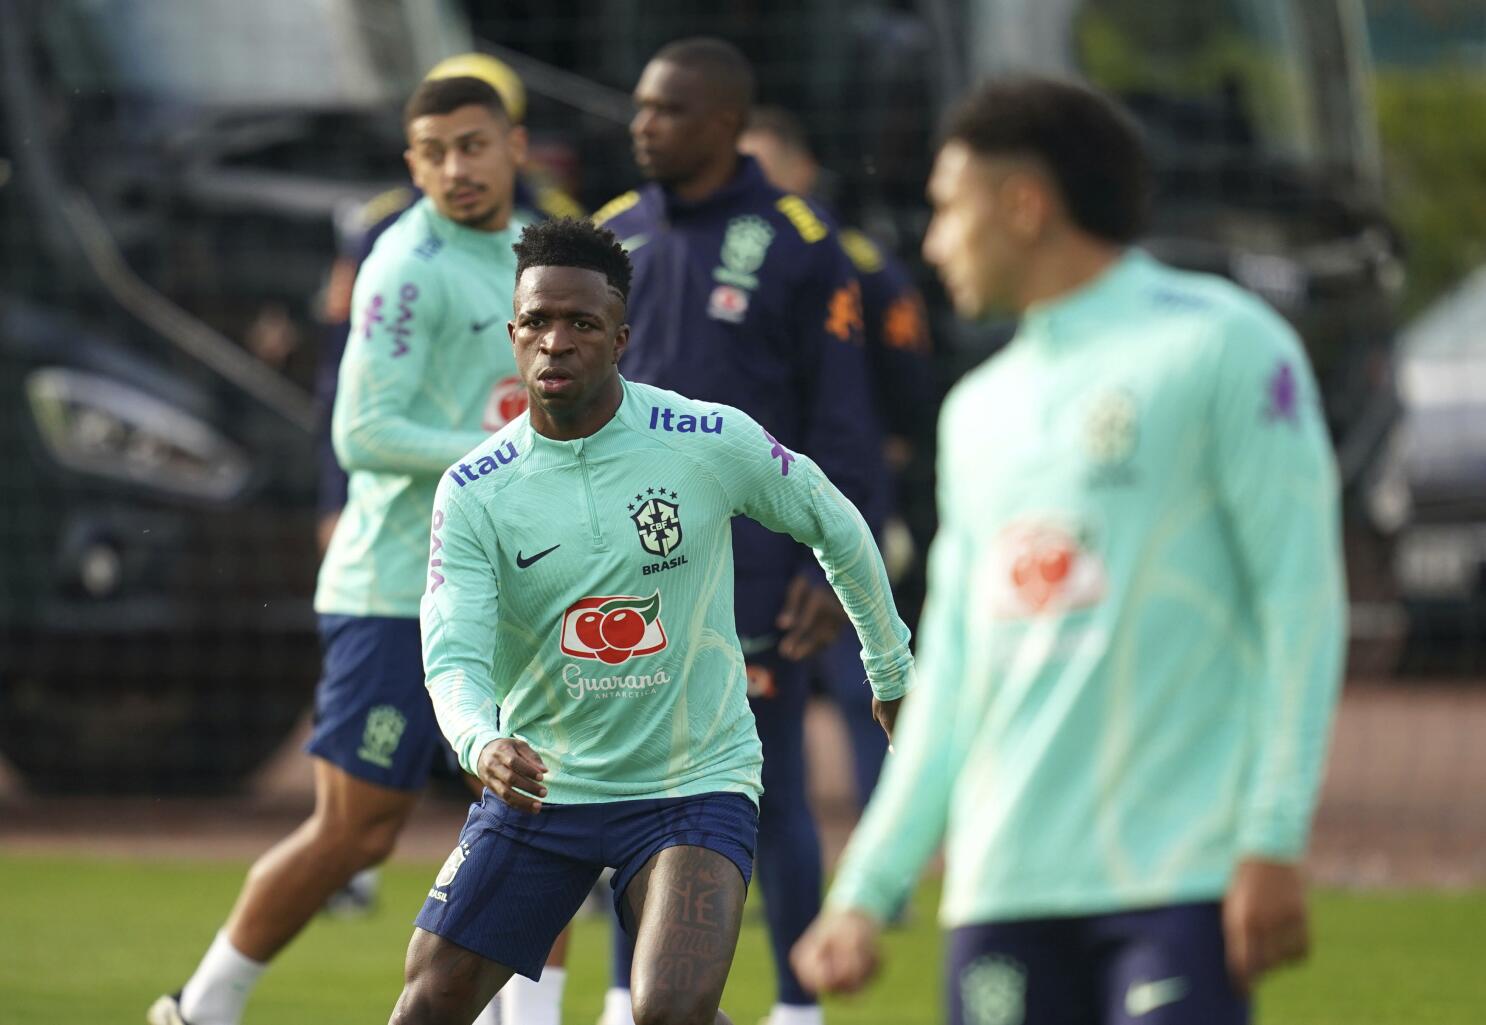 Don't pass to him' - How Vinicius Jr has overcome brutal put-down